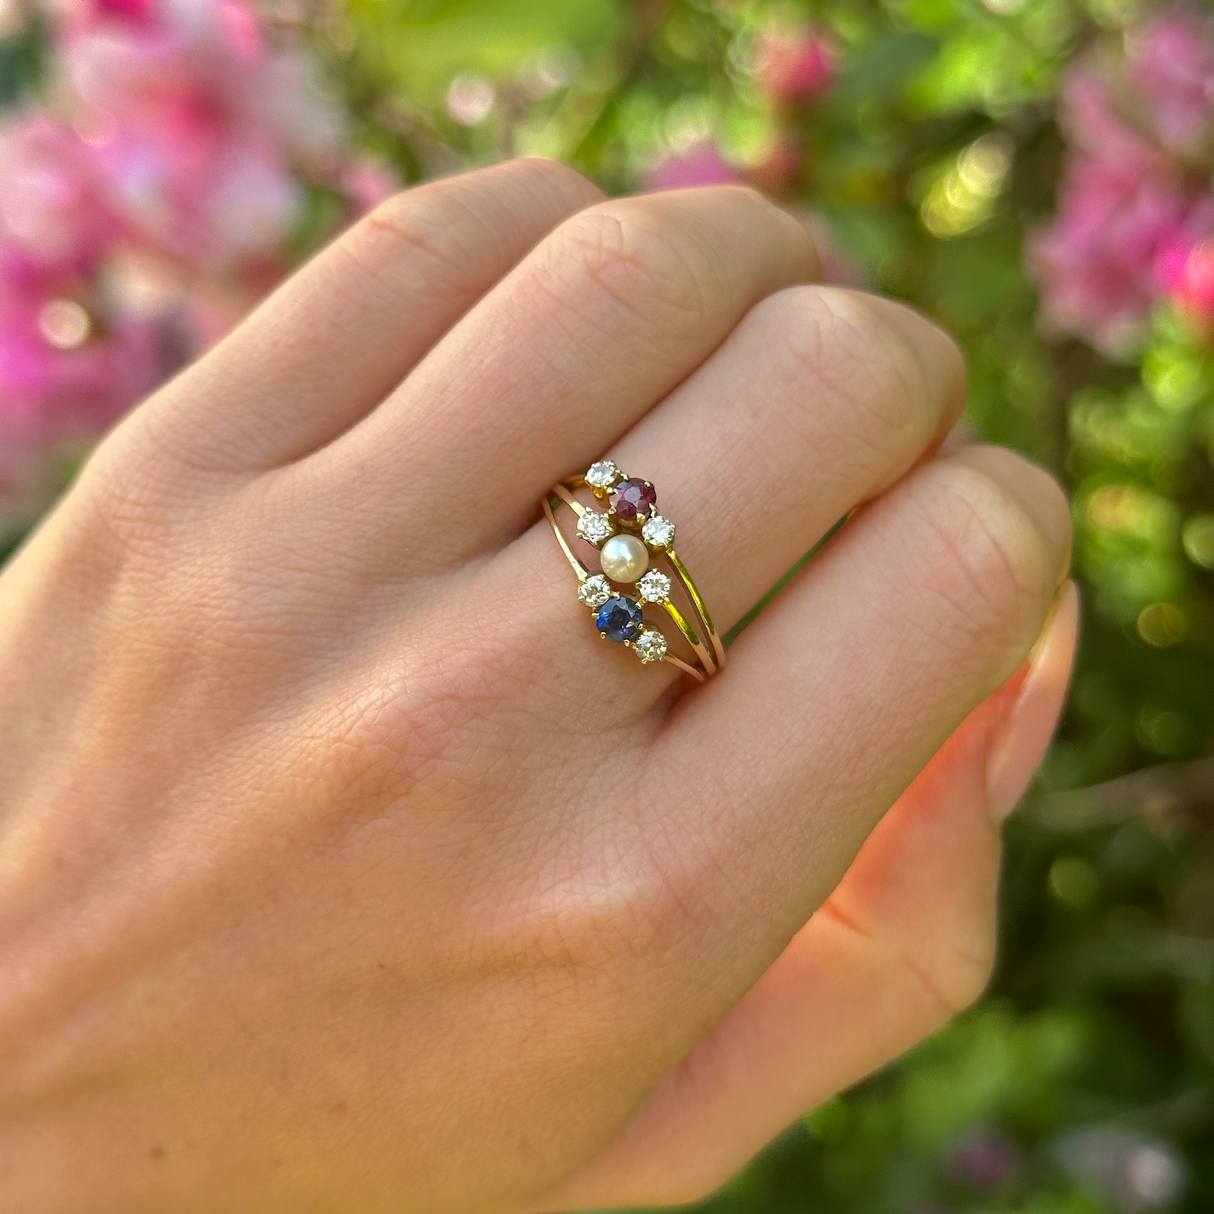 Antique Victorian, sapphire, ruby and pearl ring, 18ct Yellow Gold worn on hand.